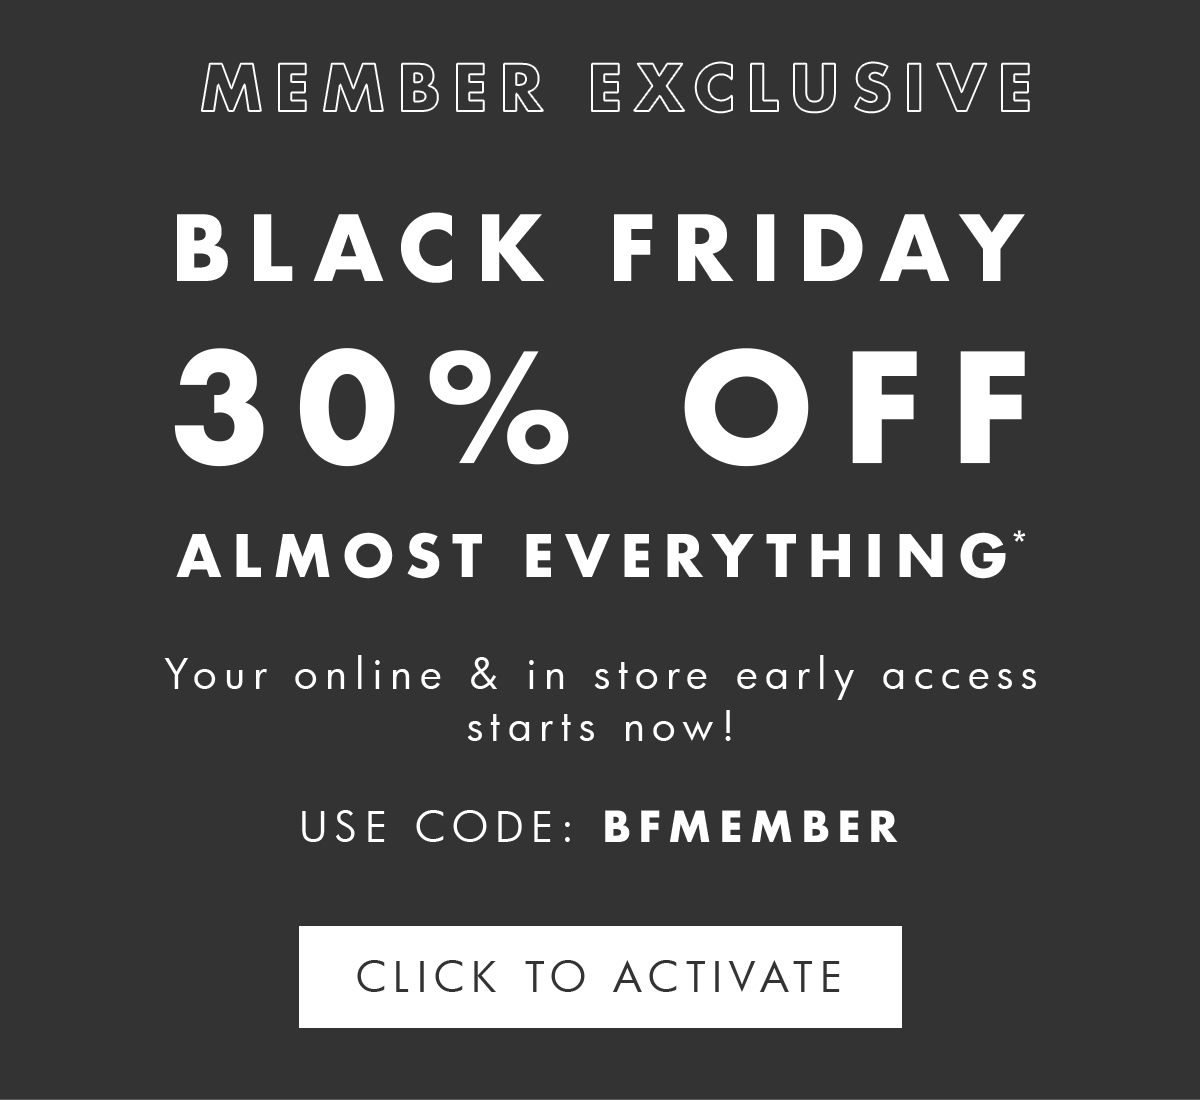 Member exclusive! Black Friday 30% off almost everything! Use code BFMEMBER. Click to activate. 